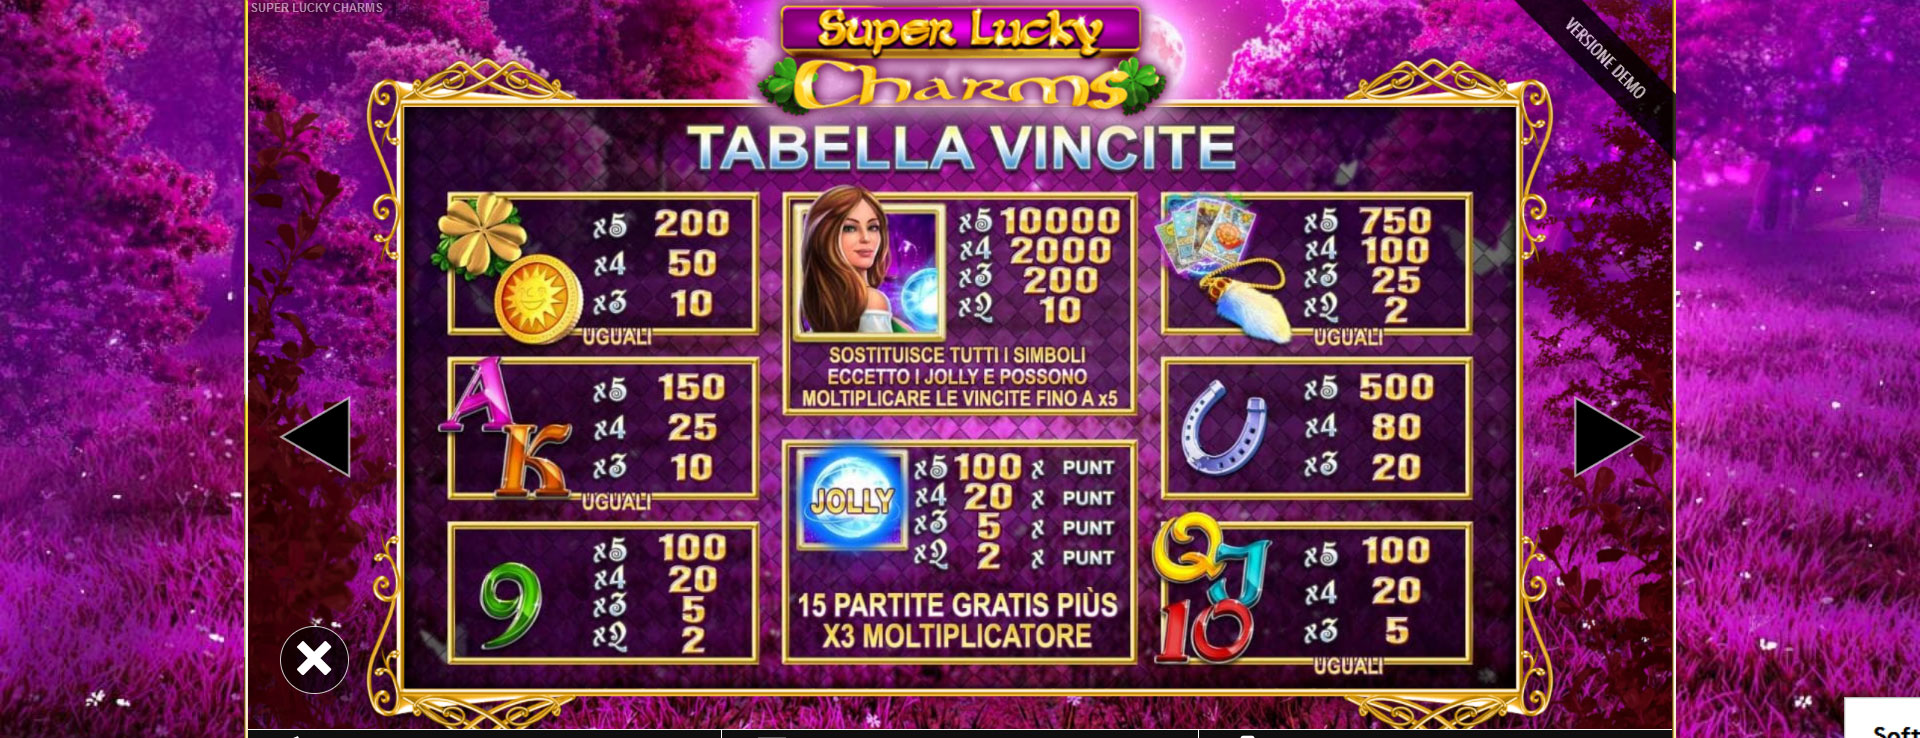 paytable della slot super lucky charms